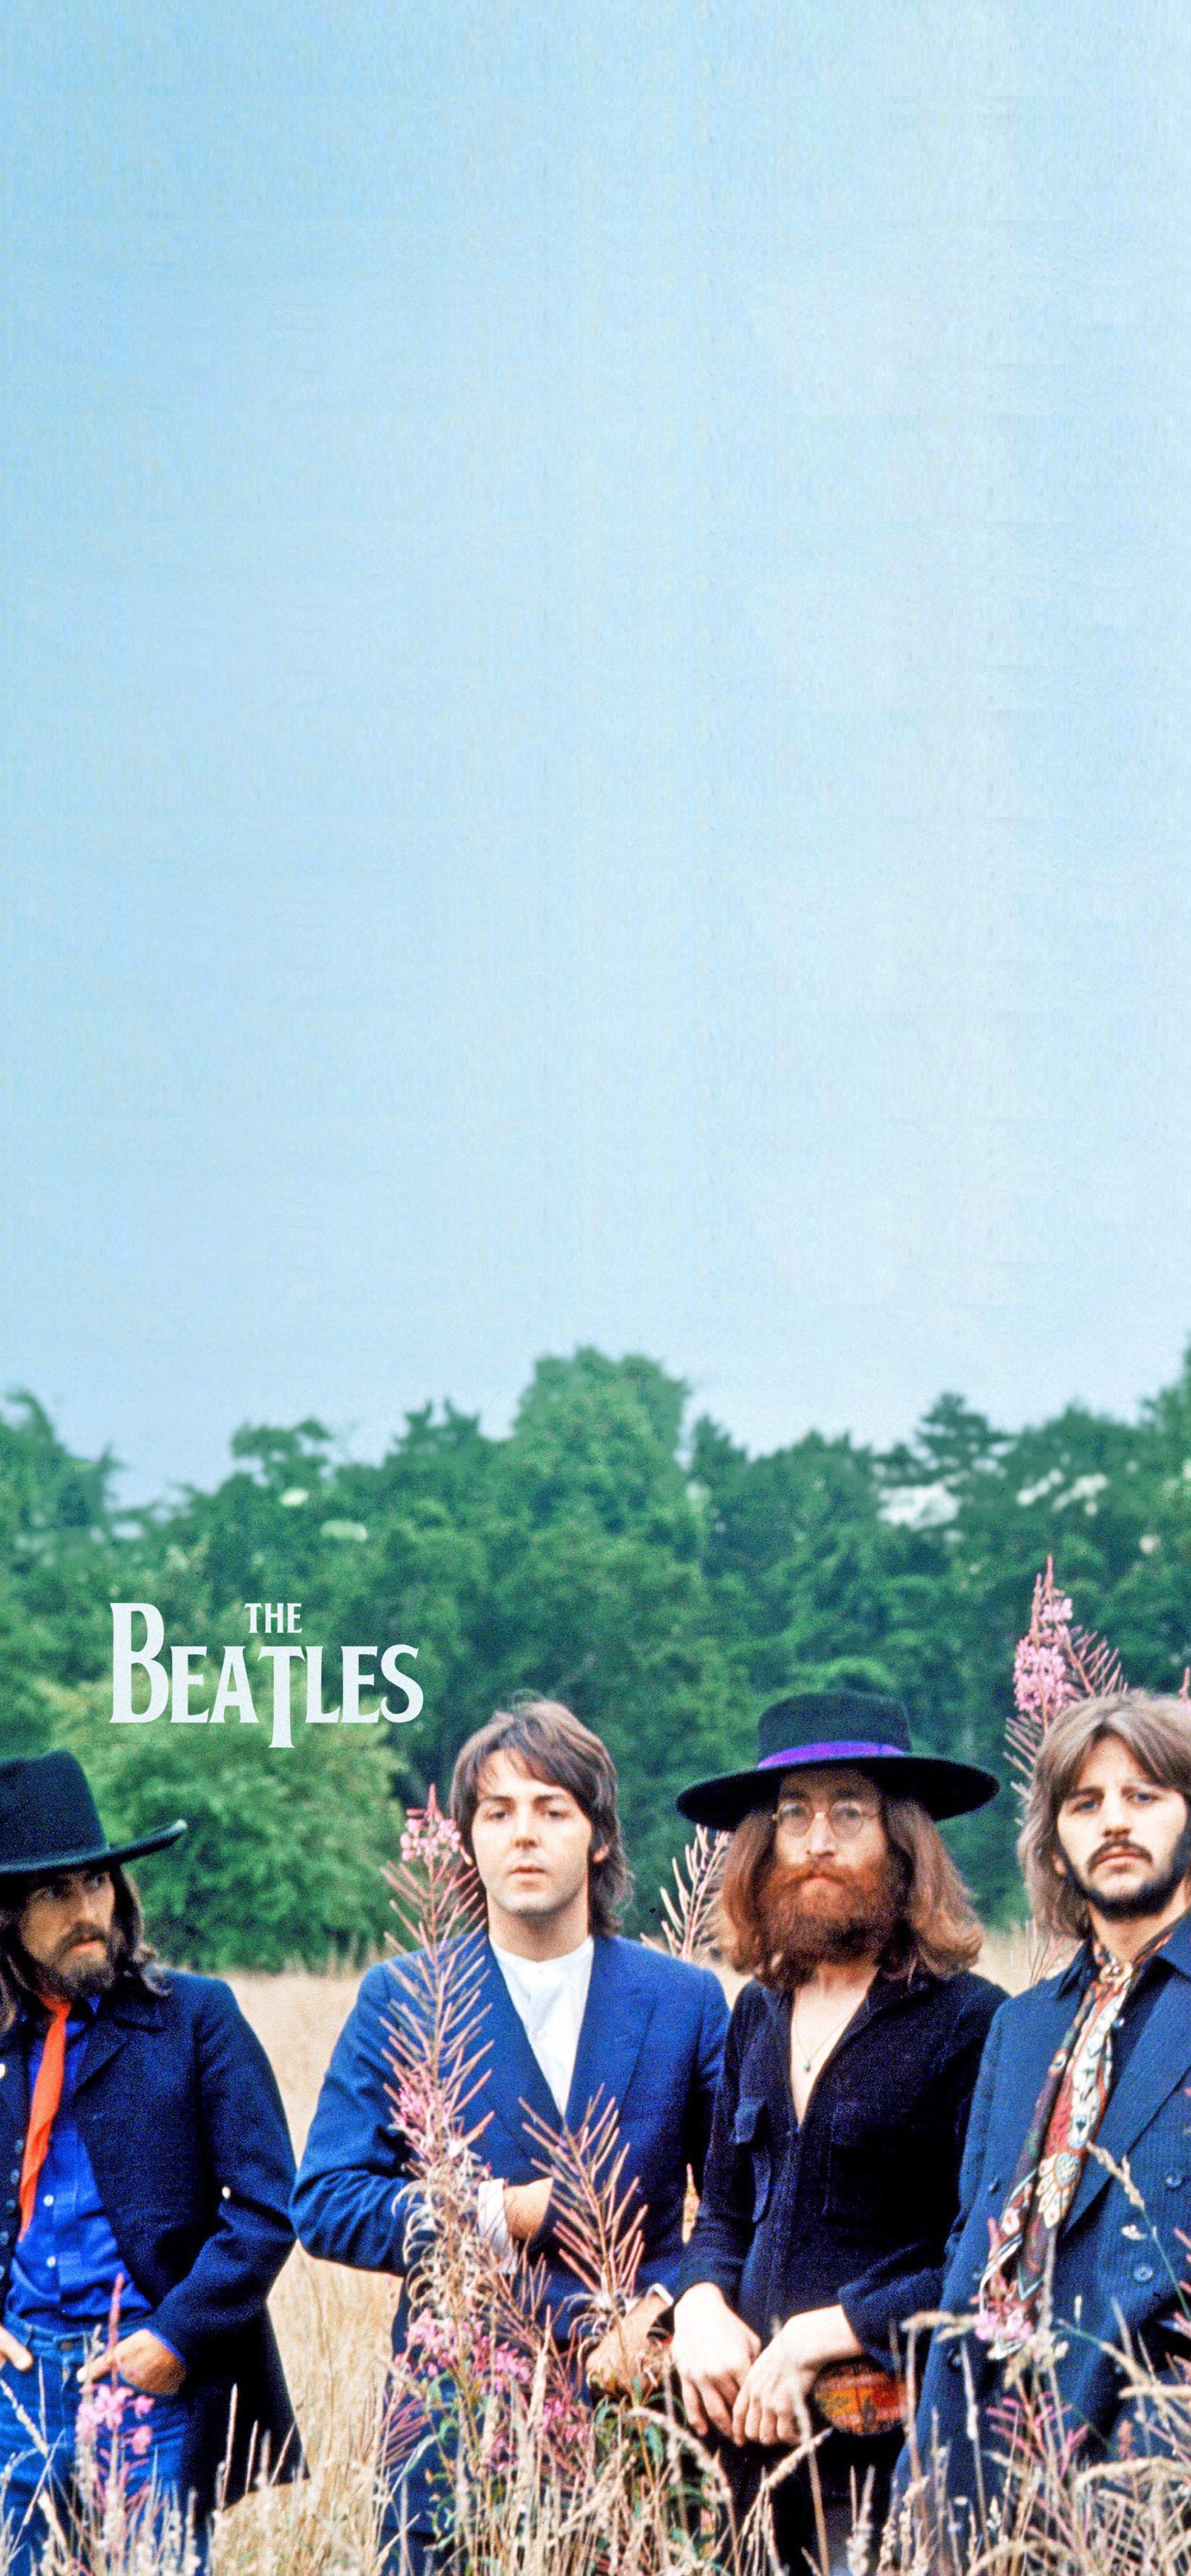 Quick little edit i made for an iphone wallpaper rbeatles